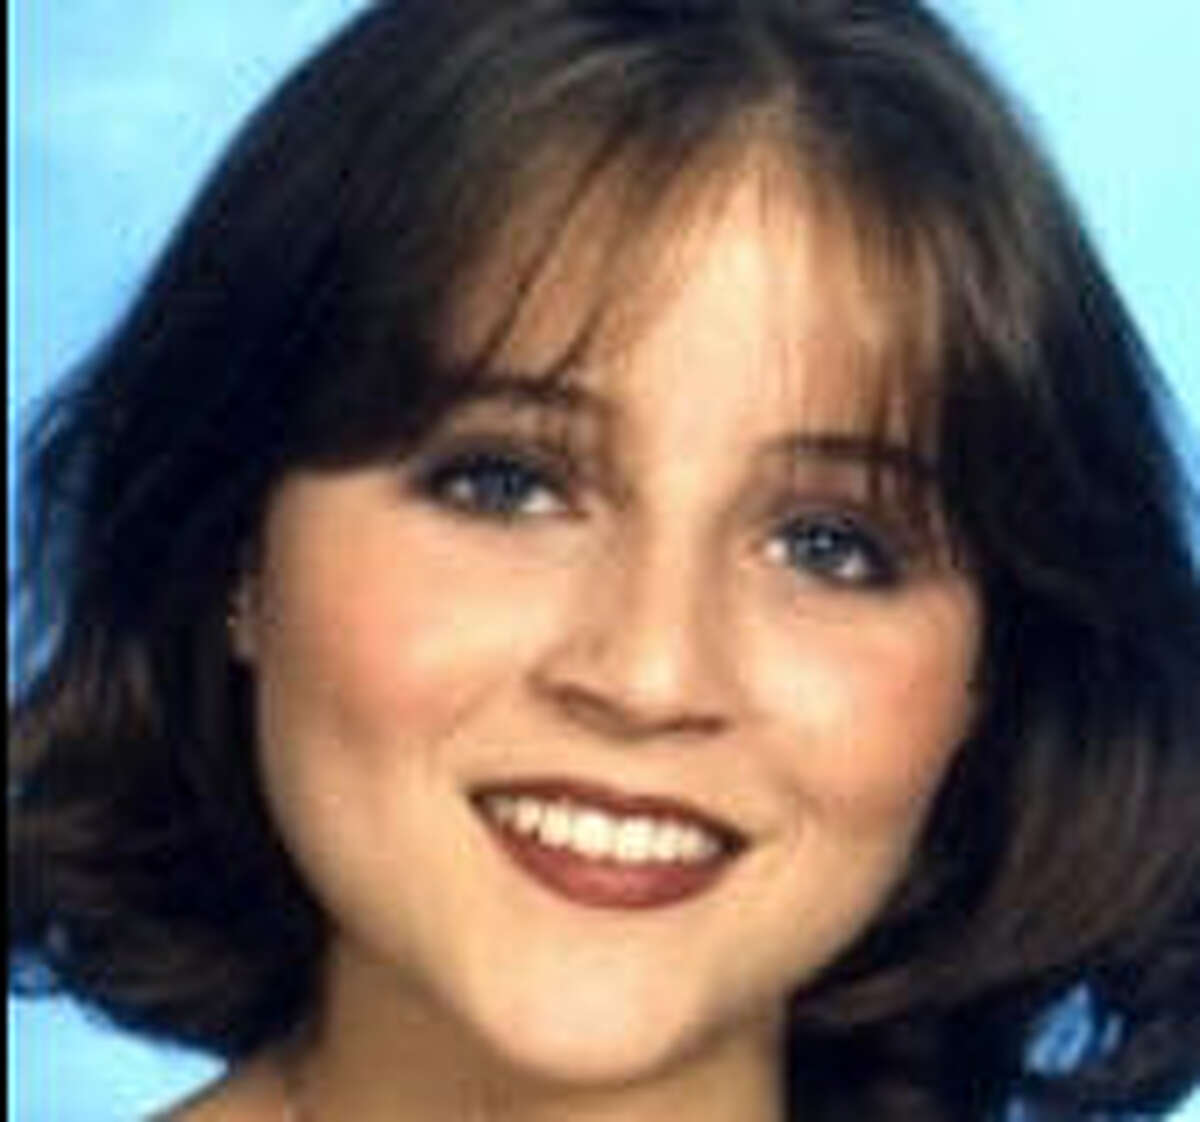 Jessica Cain – Cain disappeared on August 17, 1997 after attending a party at the Bennigan’s on Bay Area Boulevard at Interstate 45 in Clear Lake. Her truck was found parked next to the freeway near the La Marque exit, with valuables still inside.